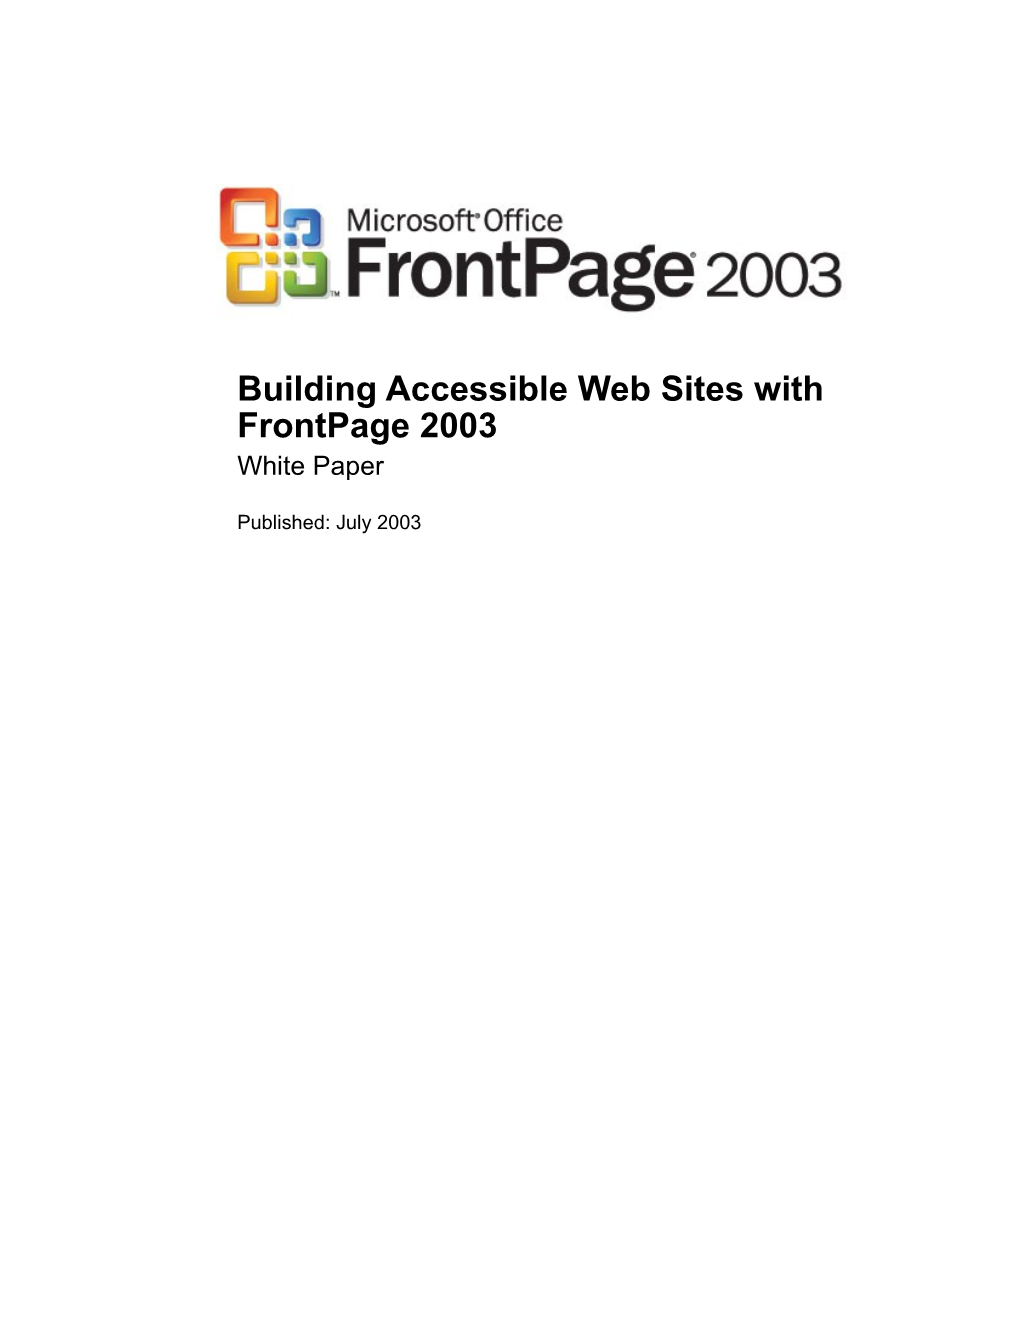 Building Accessible Web Sites with Frontpage 2003